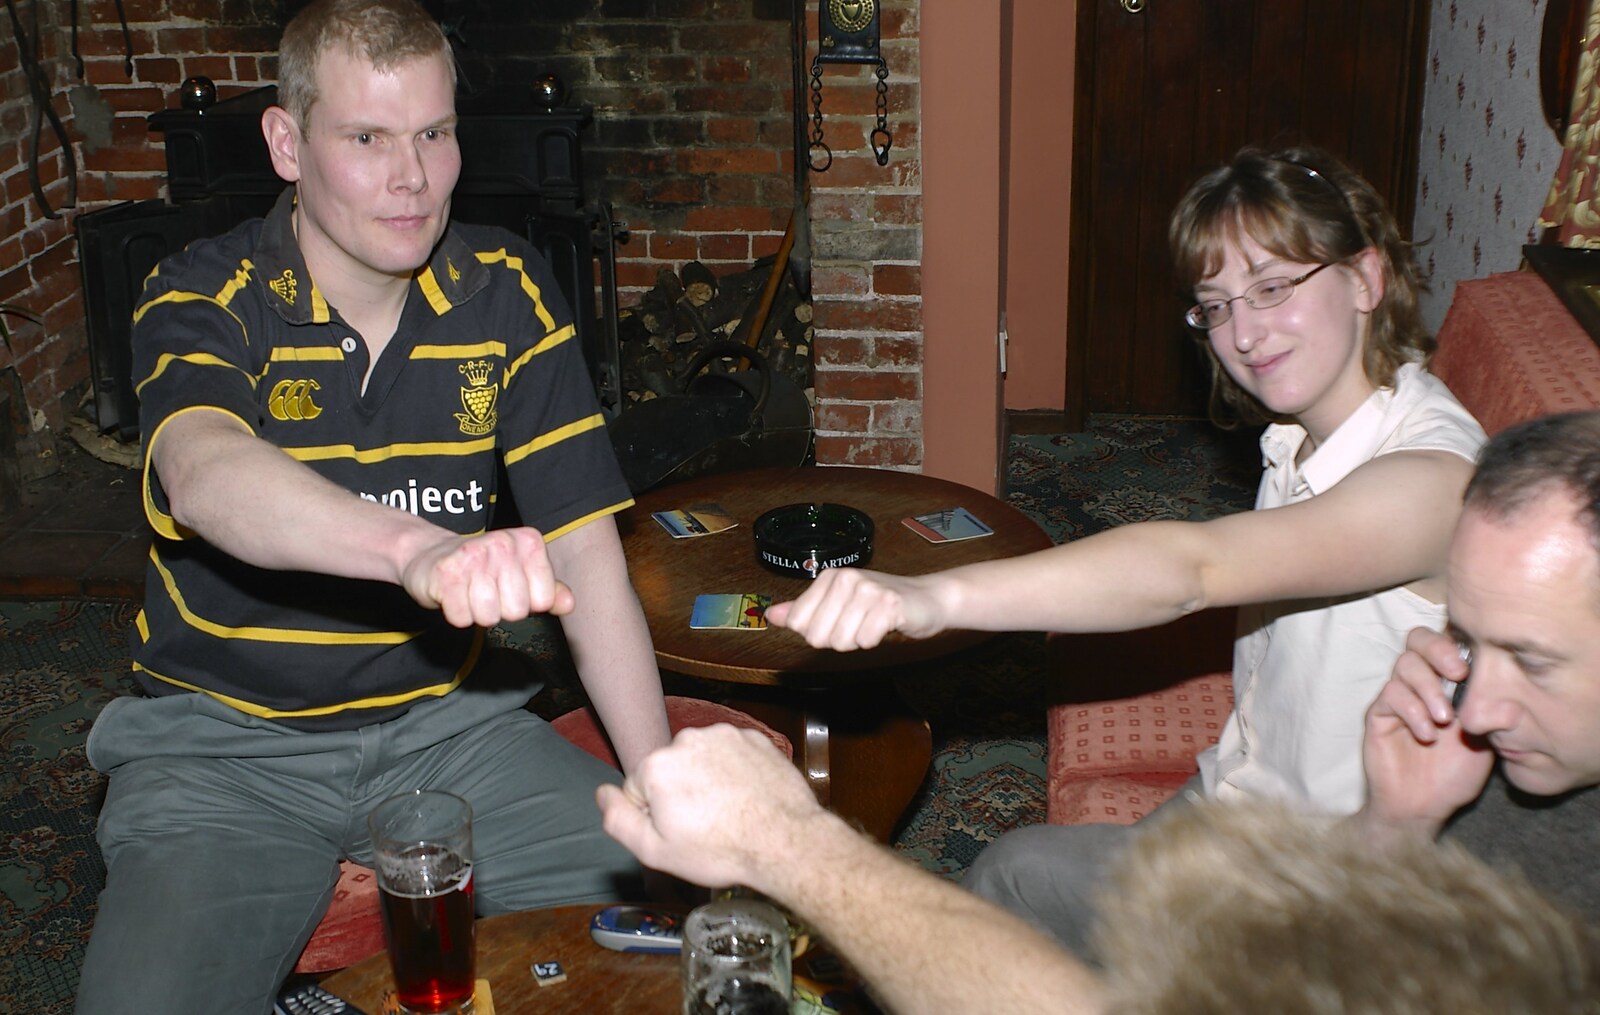 New Year's Eve at The Swan Inn, Brome, Suffolk - 31st December 2004: Some sort of rock/paper/scissors